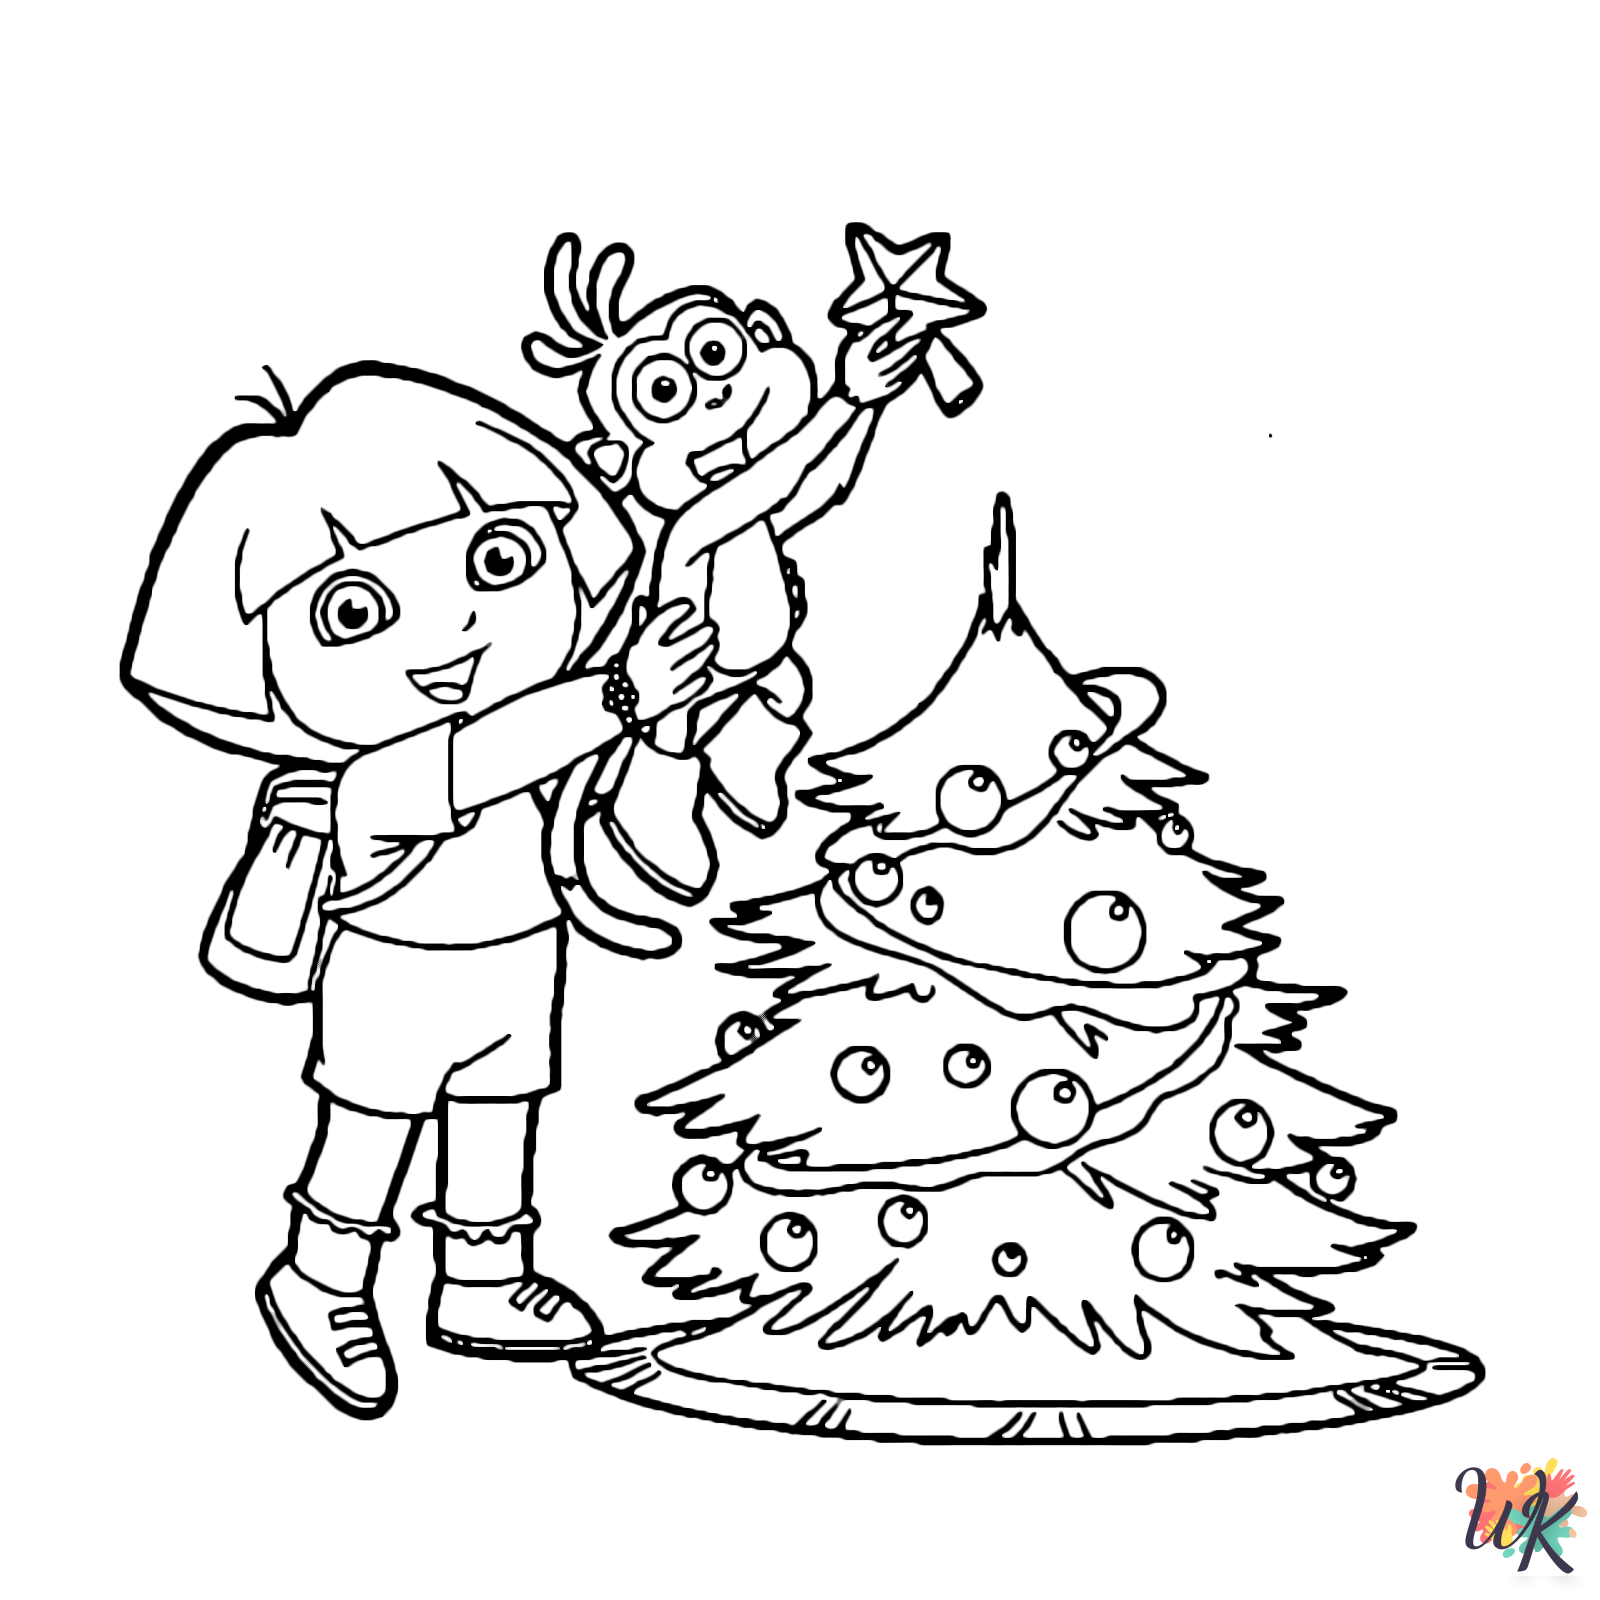 Dora Christmas decorations coloring pages